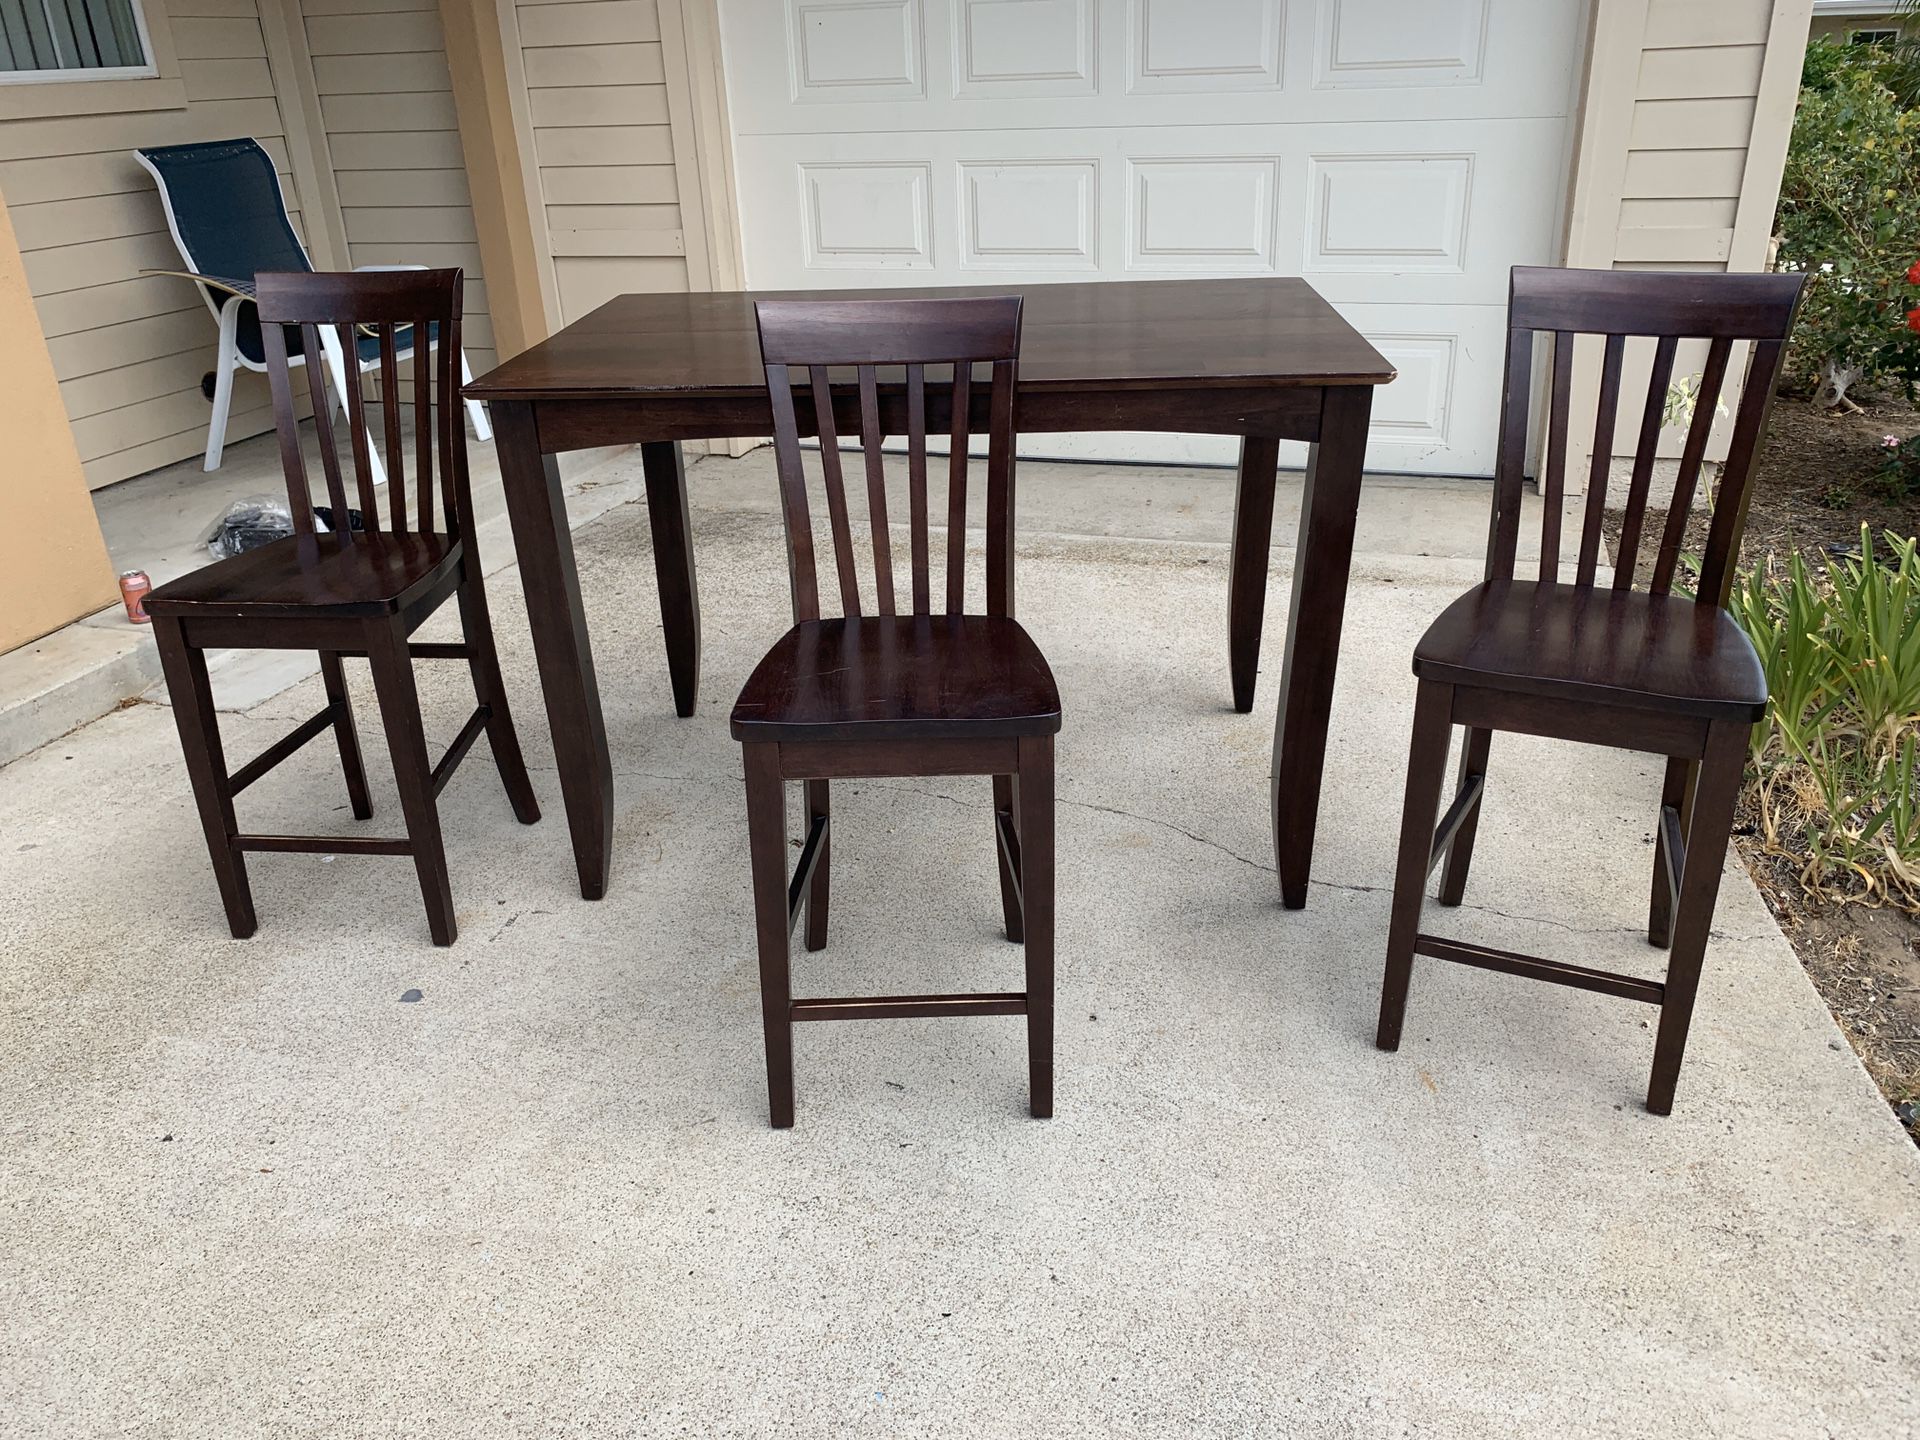 Dinner Table and Three Chair Set